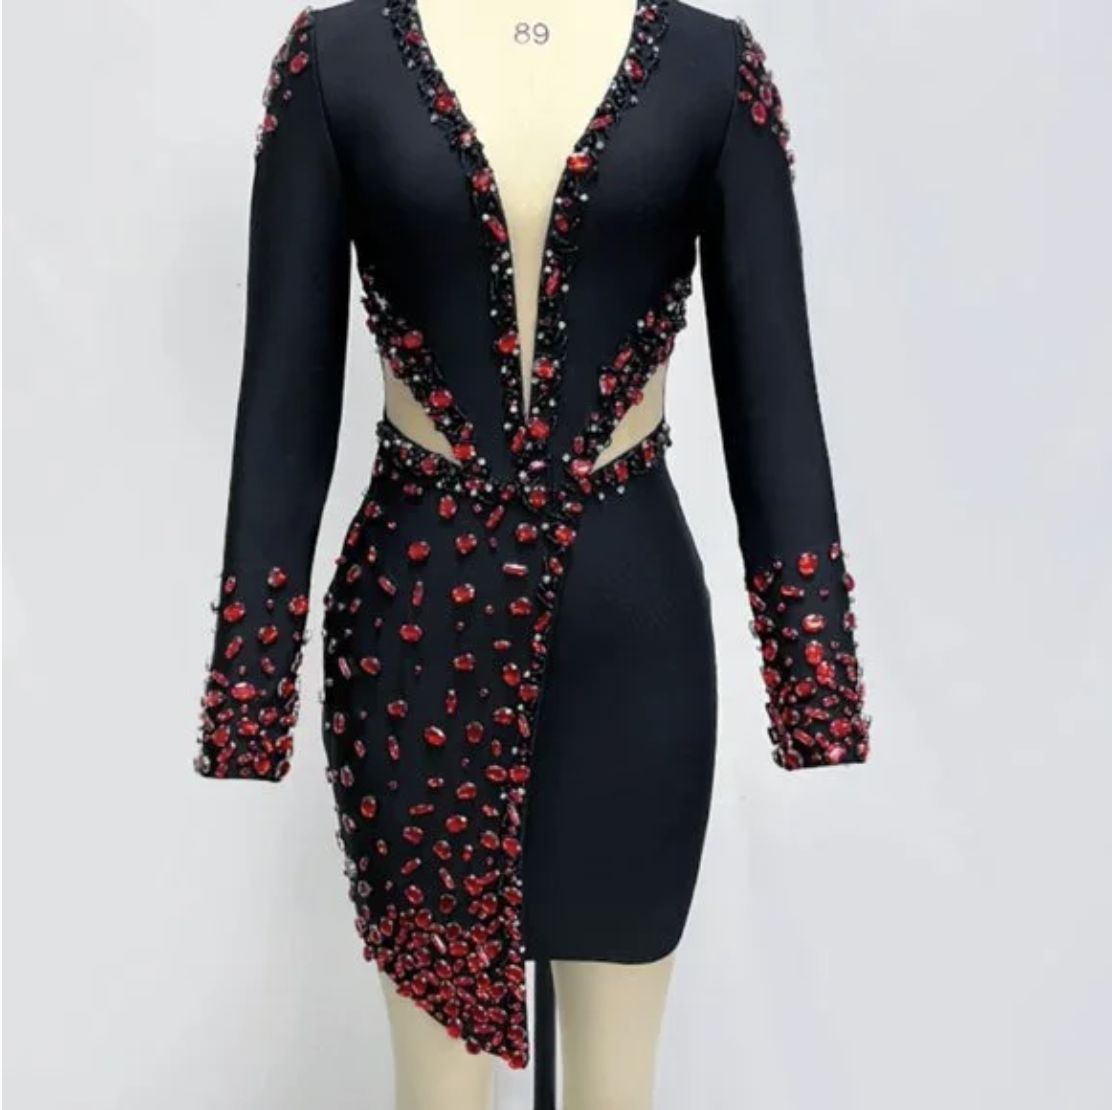 Style Crystal Embellished Pinkapple Boutique Size 6 Long Sleeve Sequined Black Cocktail Dress on Queenly